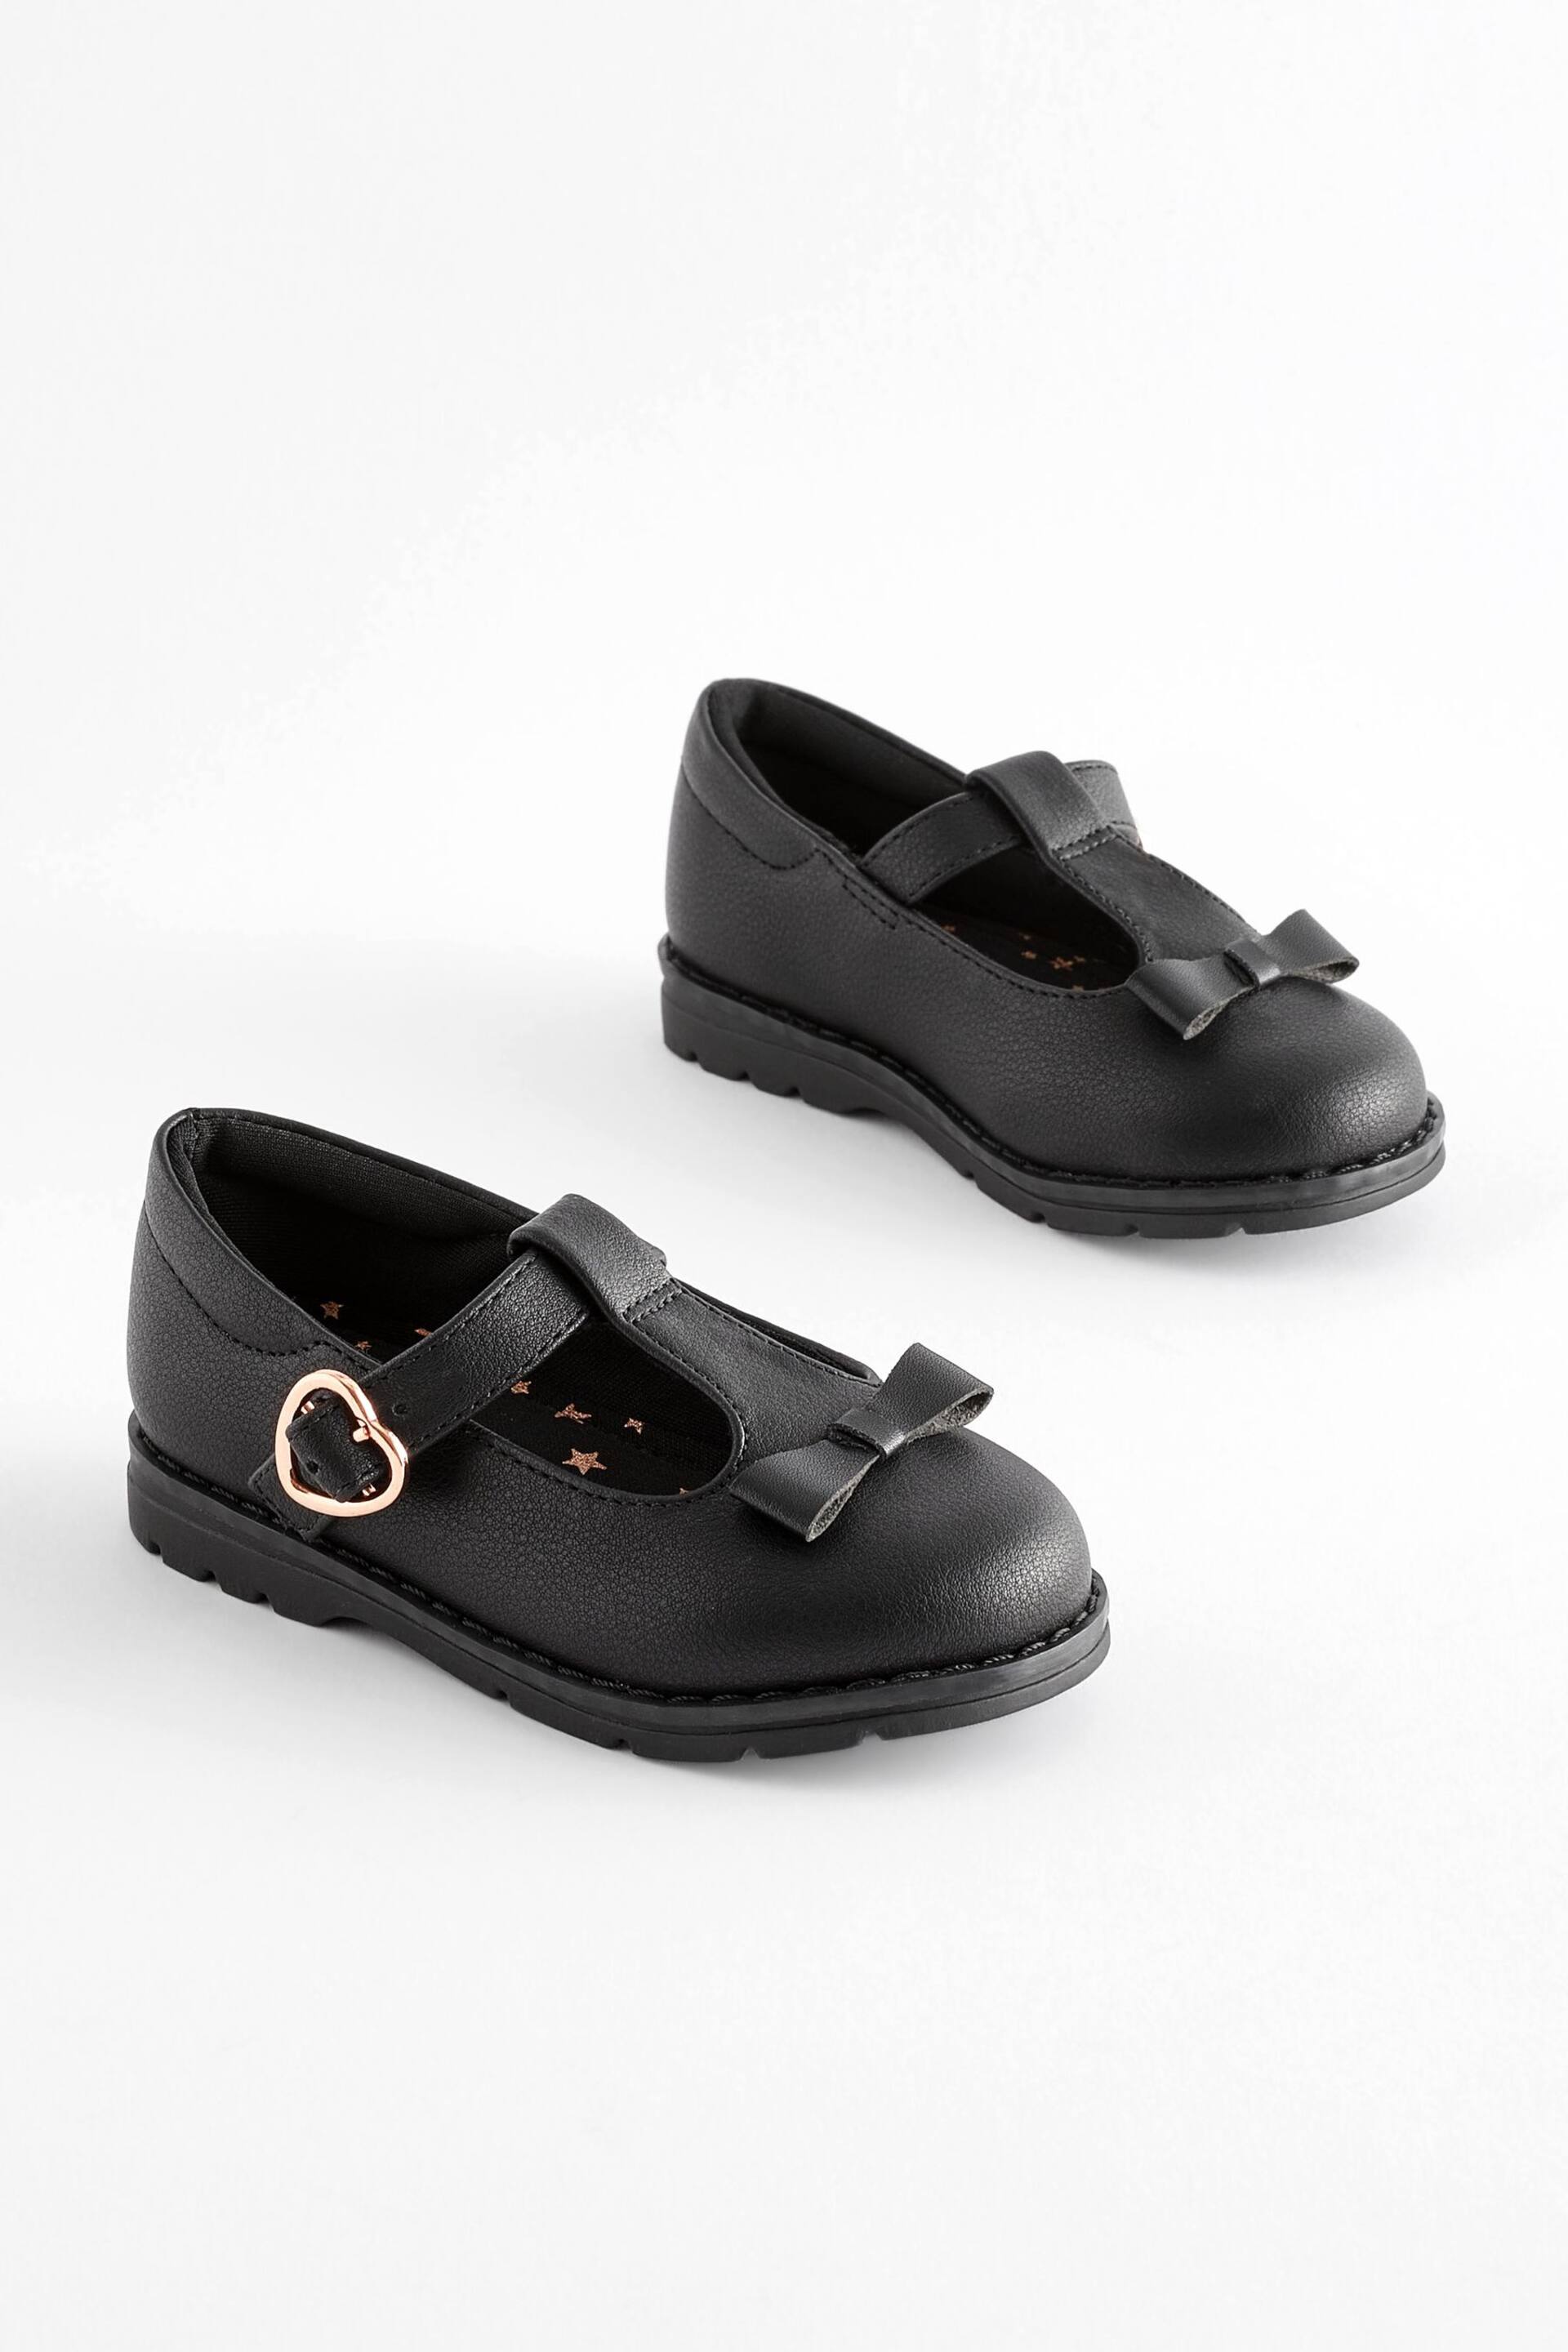 Black Wide Fit (G) School Junior Bow T-Bar Shoes - Image 4 of 6